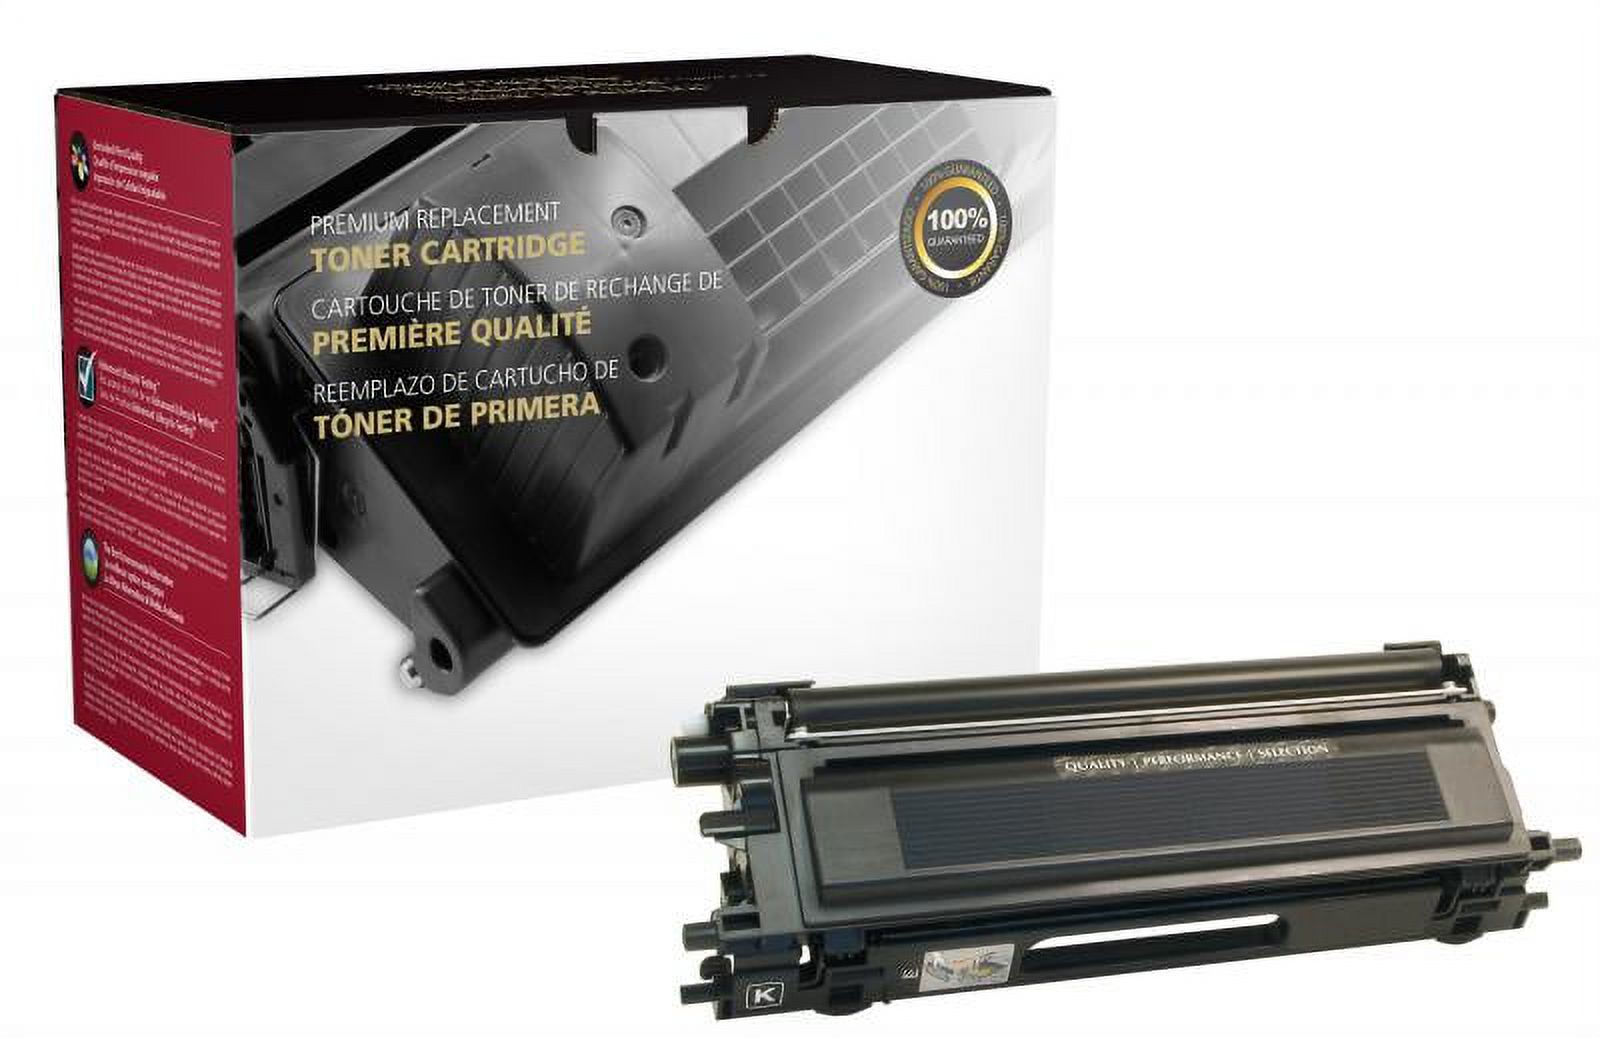 Clover Imaging - Remanufactured Toner - TN115 Toner Black High Yield Remanufactured Replacement for the for Black - image 1 of 6